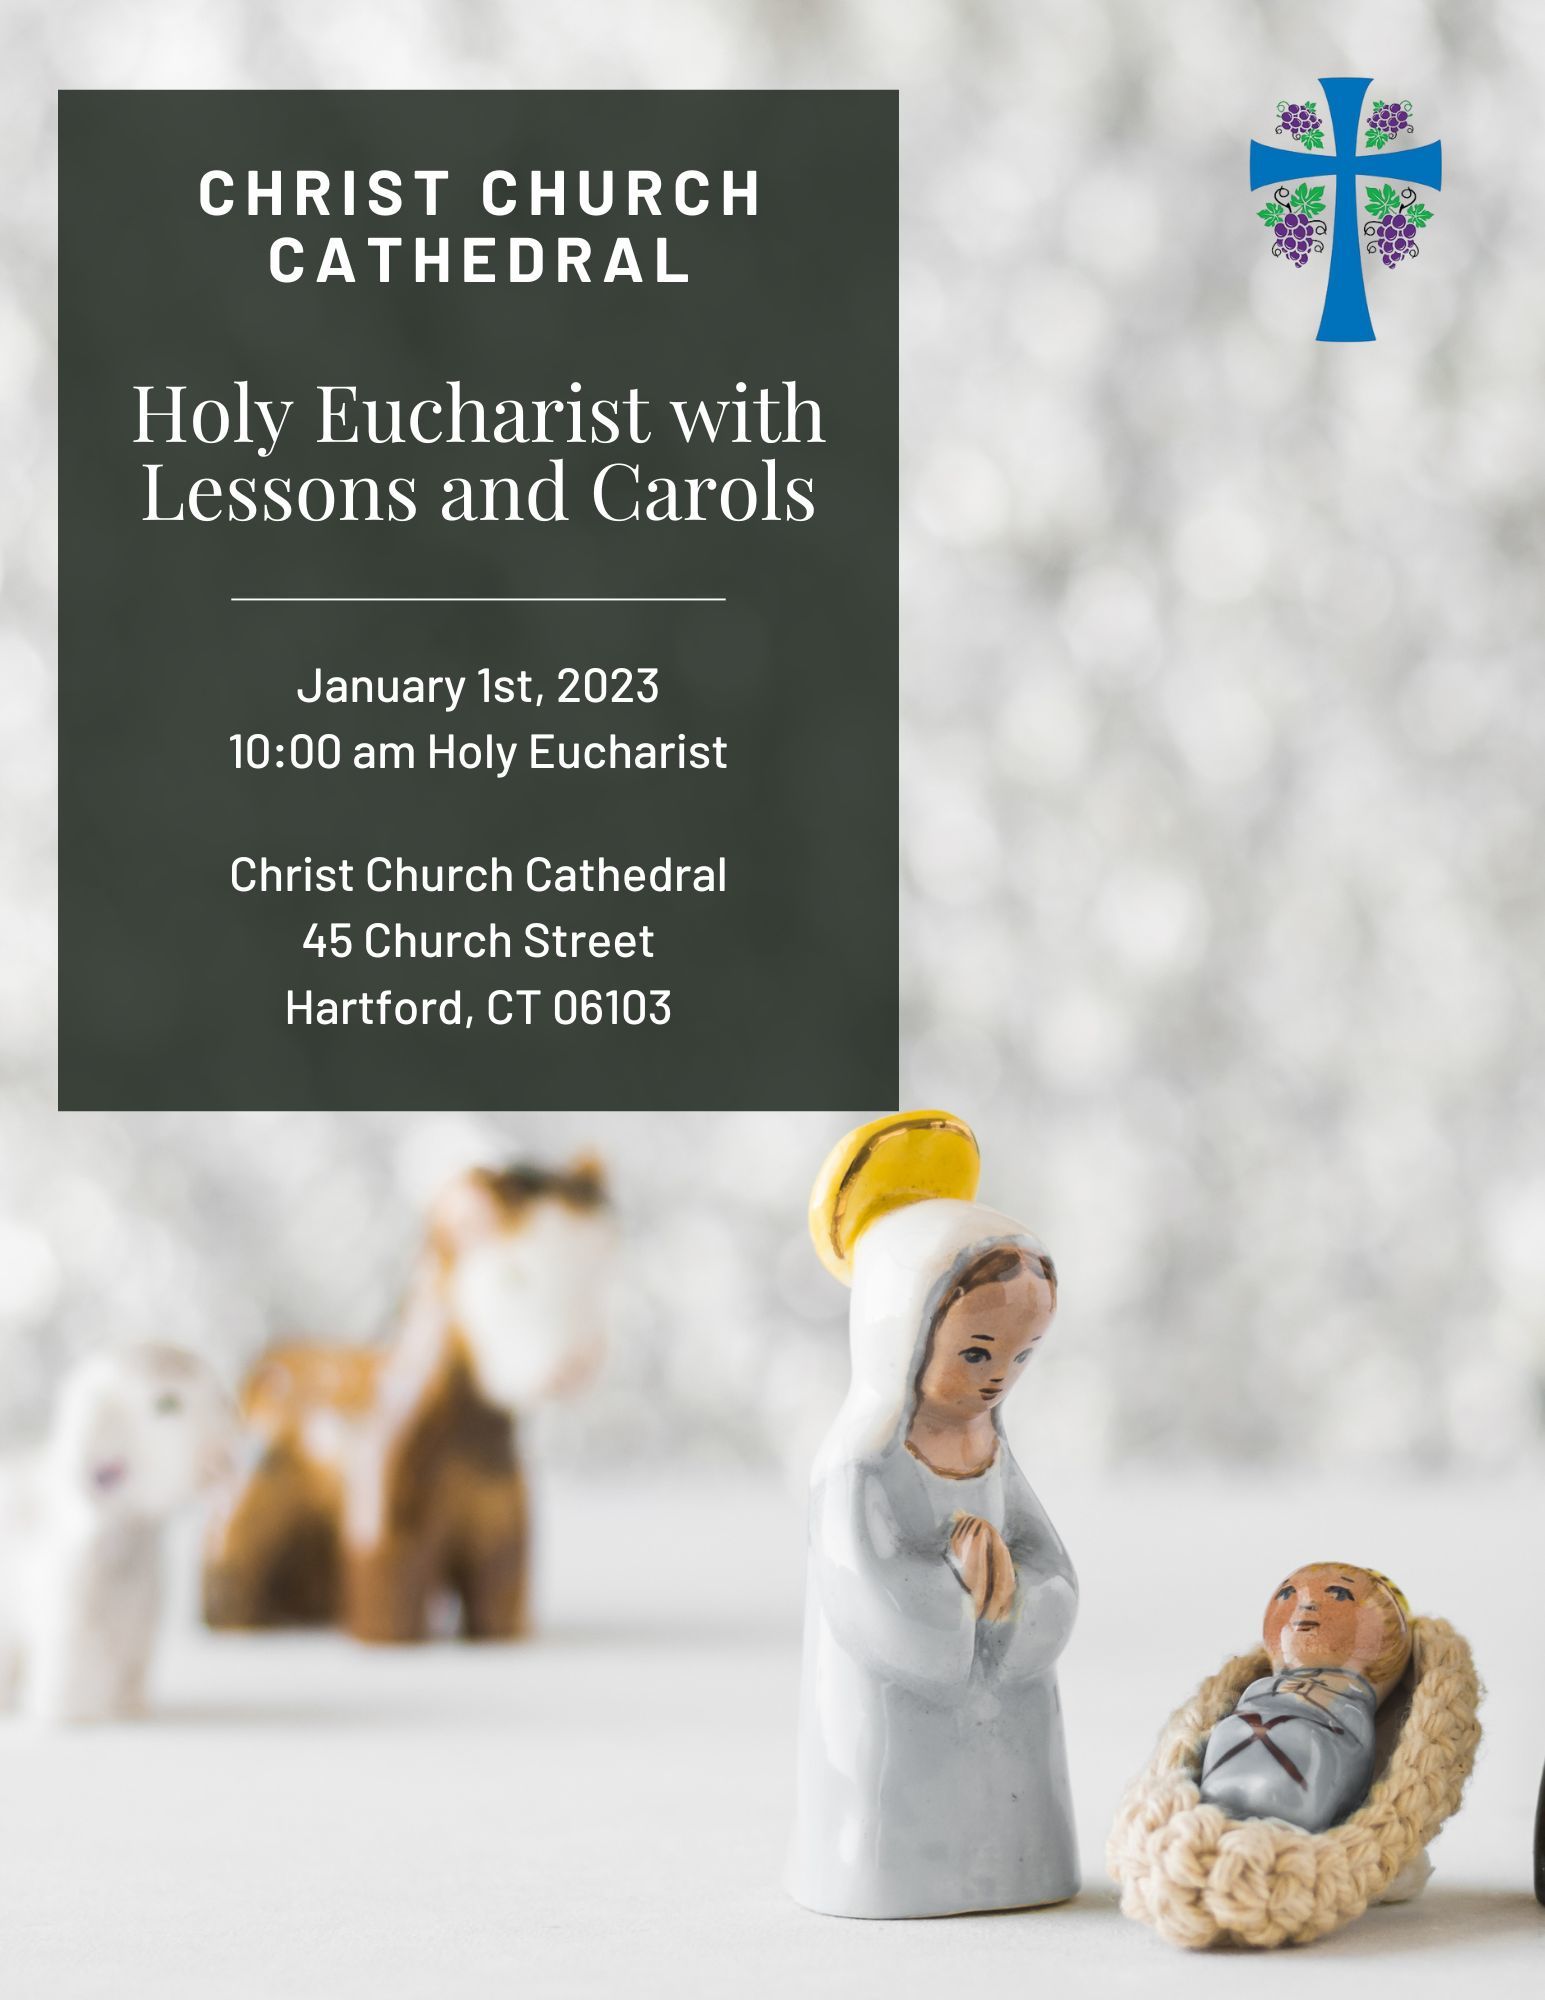 Holy Eucharist with Lessons and Carols